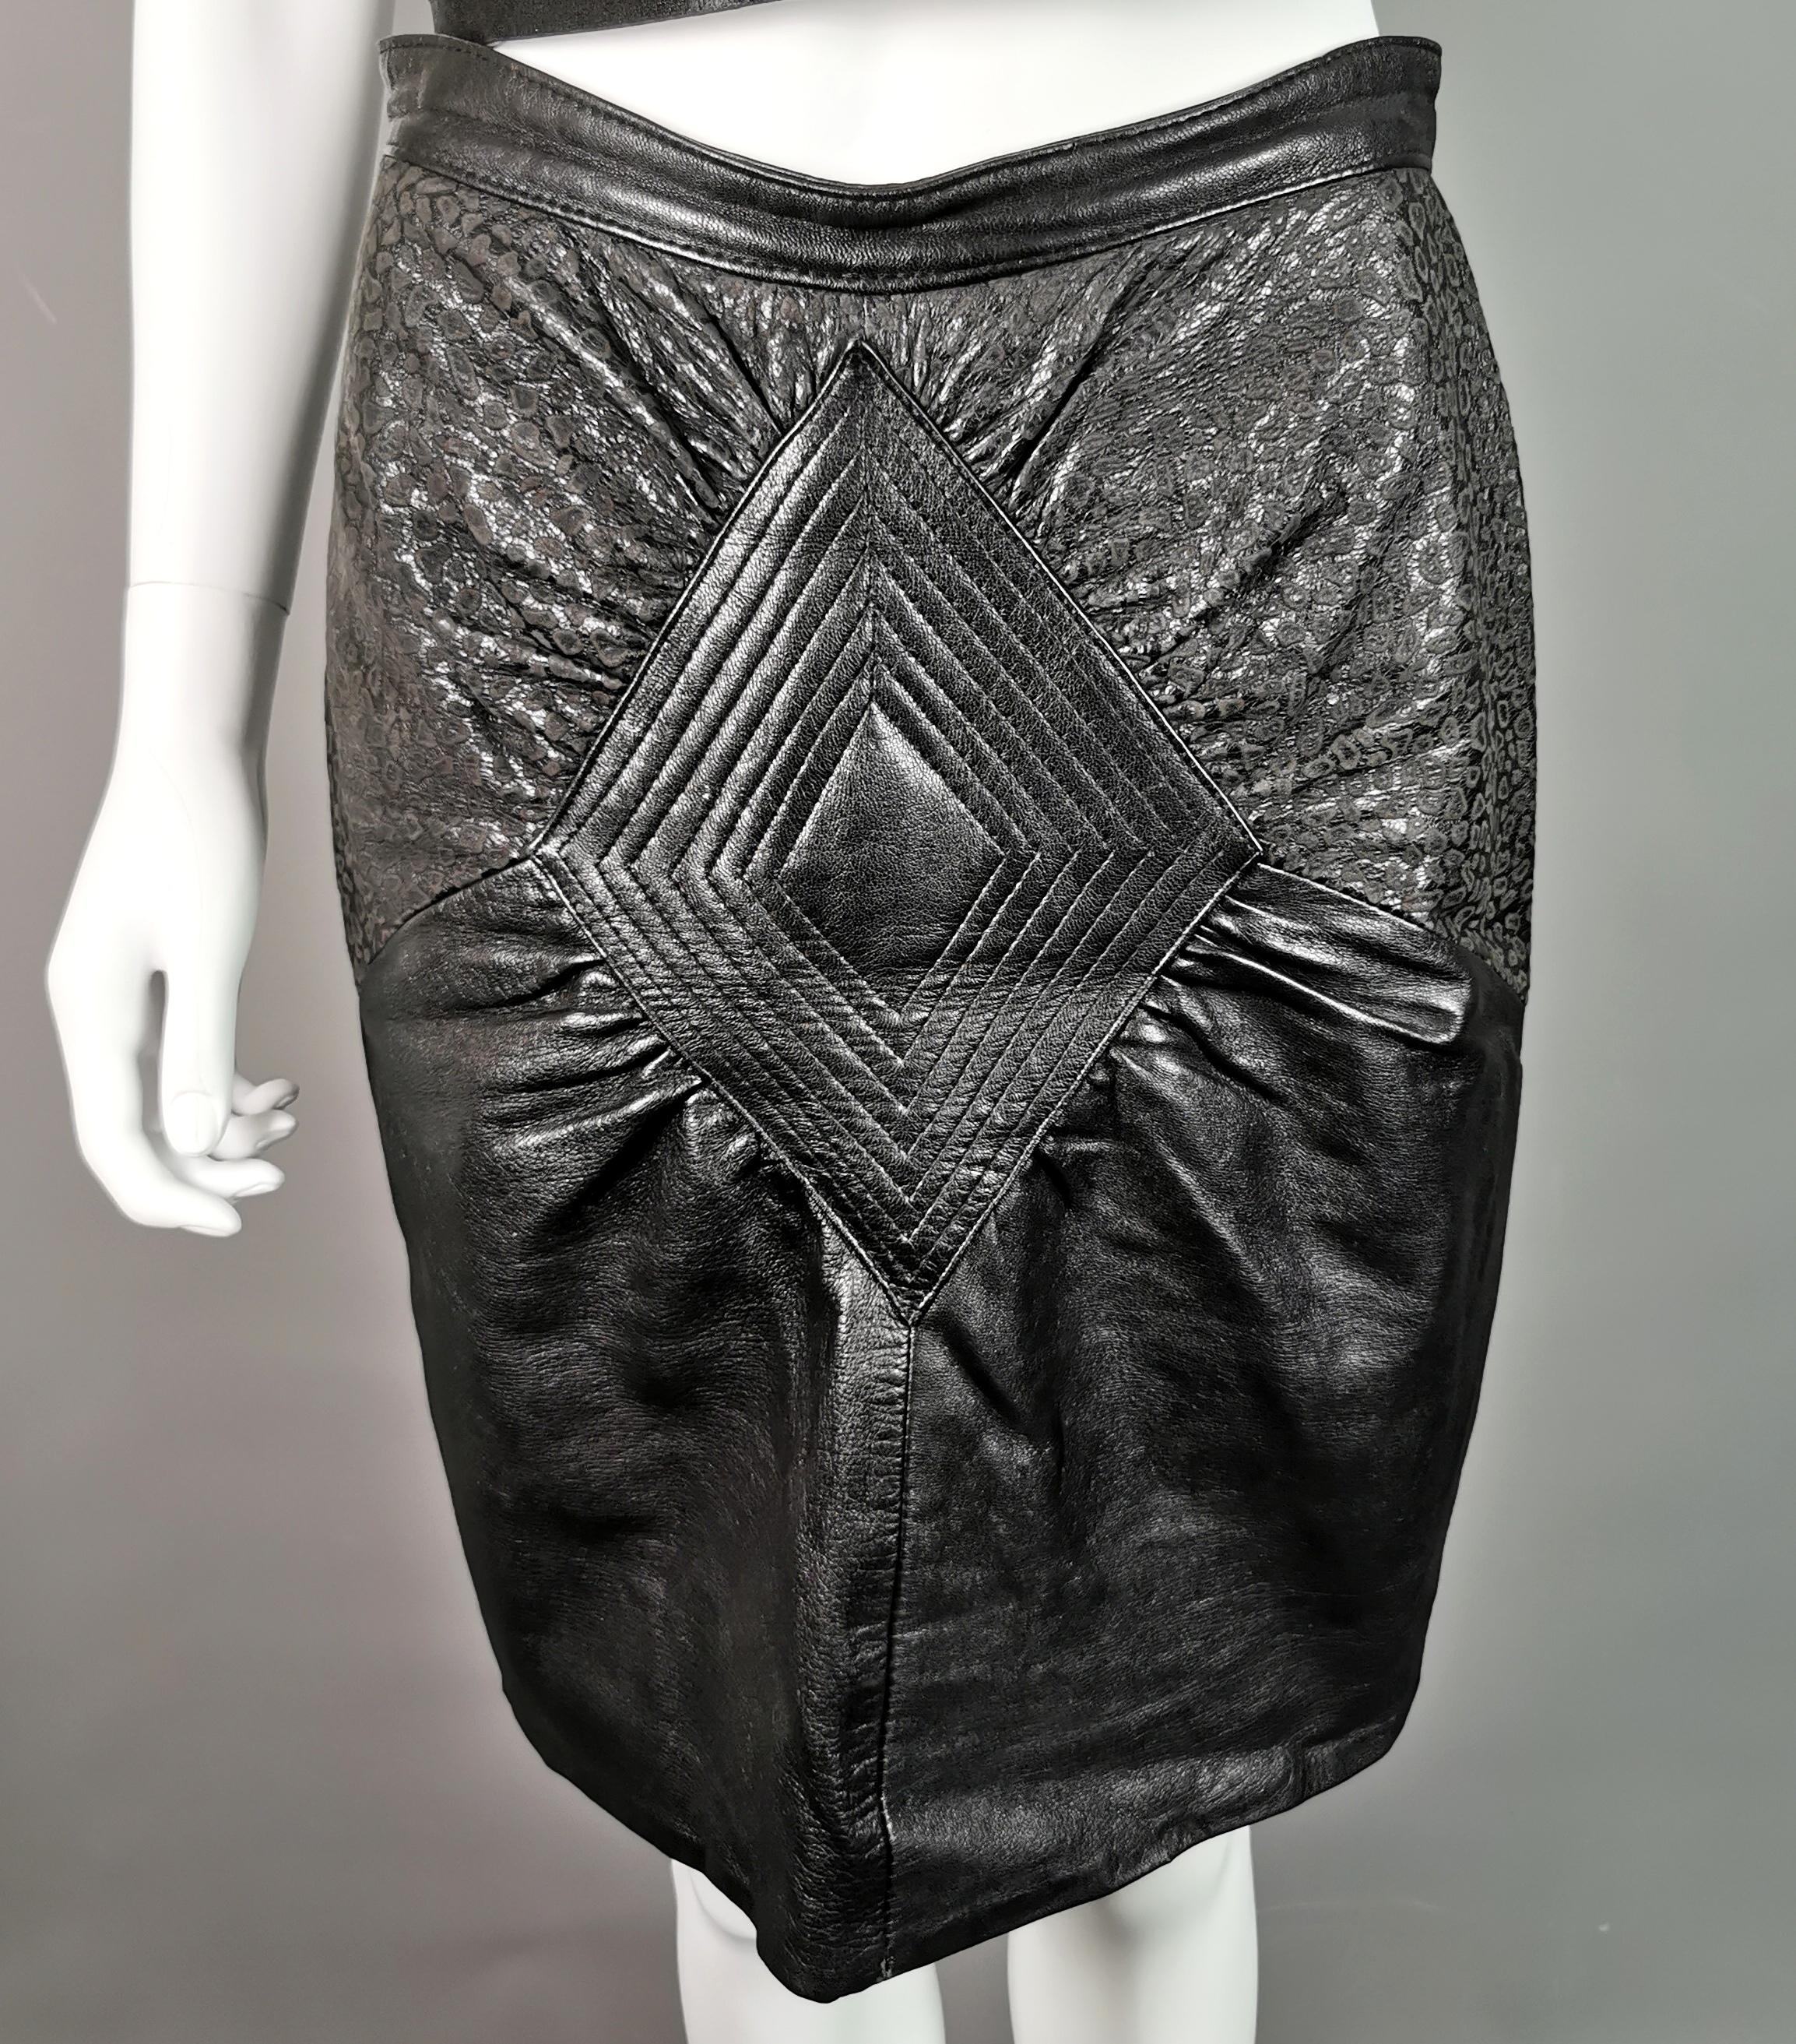 A stylish vintage 1980s leather mini skirt.

This is such a versatile piece and a leather skirt is a real staple that can be dressed up or down in many ways and styles.

This is a figure hugging, pencil silhouette skirt, just above the knee but may